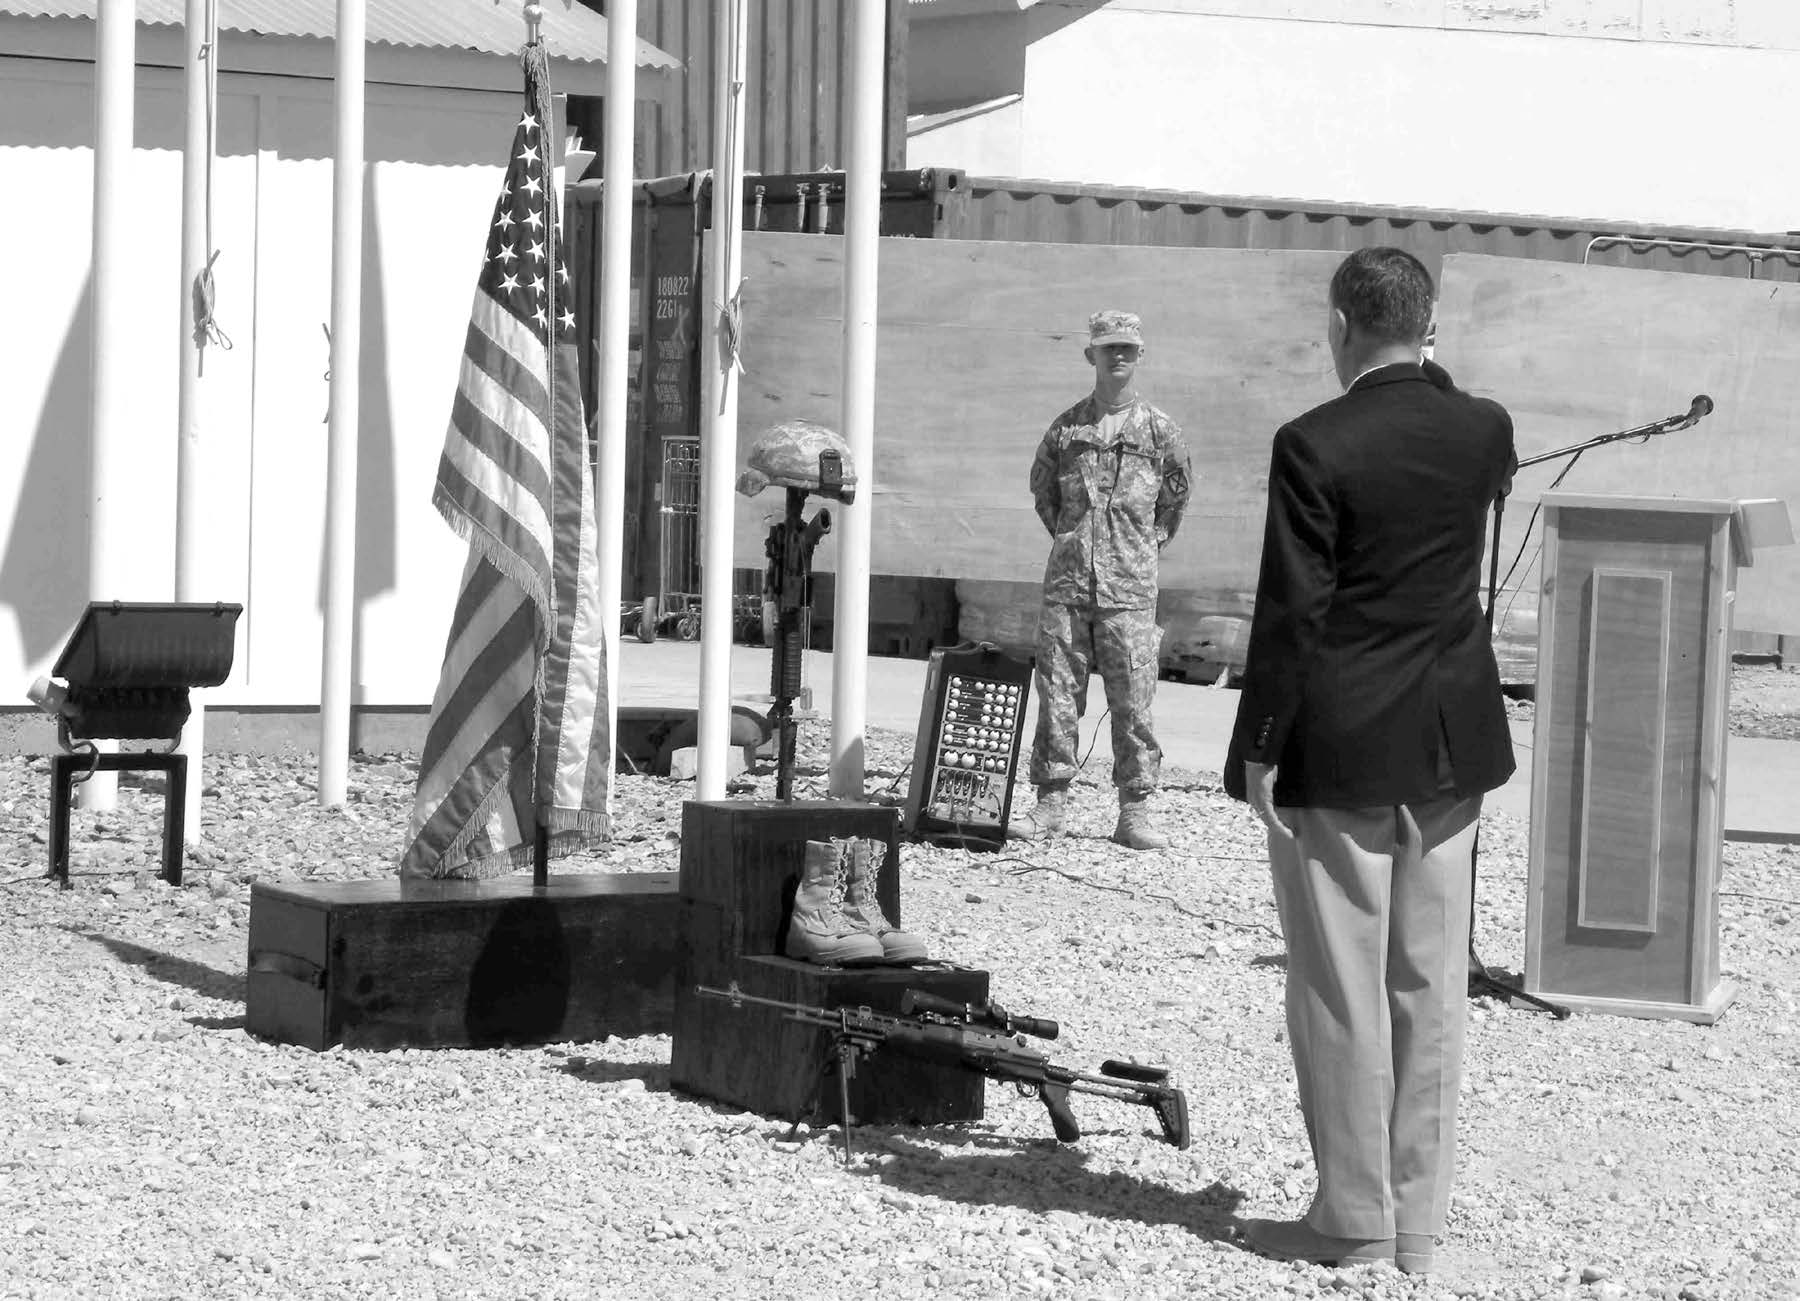 President Gene Wikle renders a final salute after a memorial service for Sergeant First Class Glen J. Whetten at Camp Blackhorse, east of Kabul. U.S. soldiers, sailors, Marines, and airman along with coalition forces from Afghanistan, Australia, Canada, France, and Germany paid tribute to Brother Whetton. Courtesy of Eugene J. Wikle.